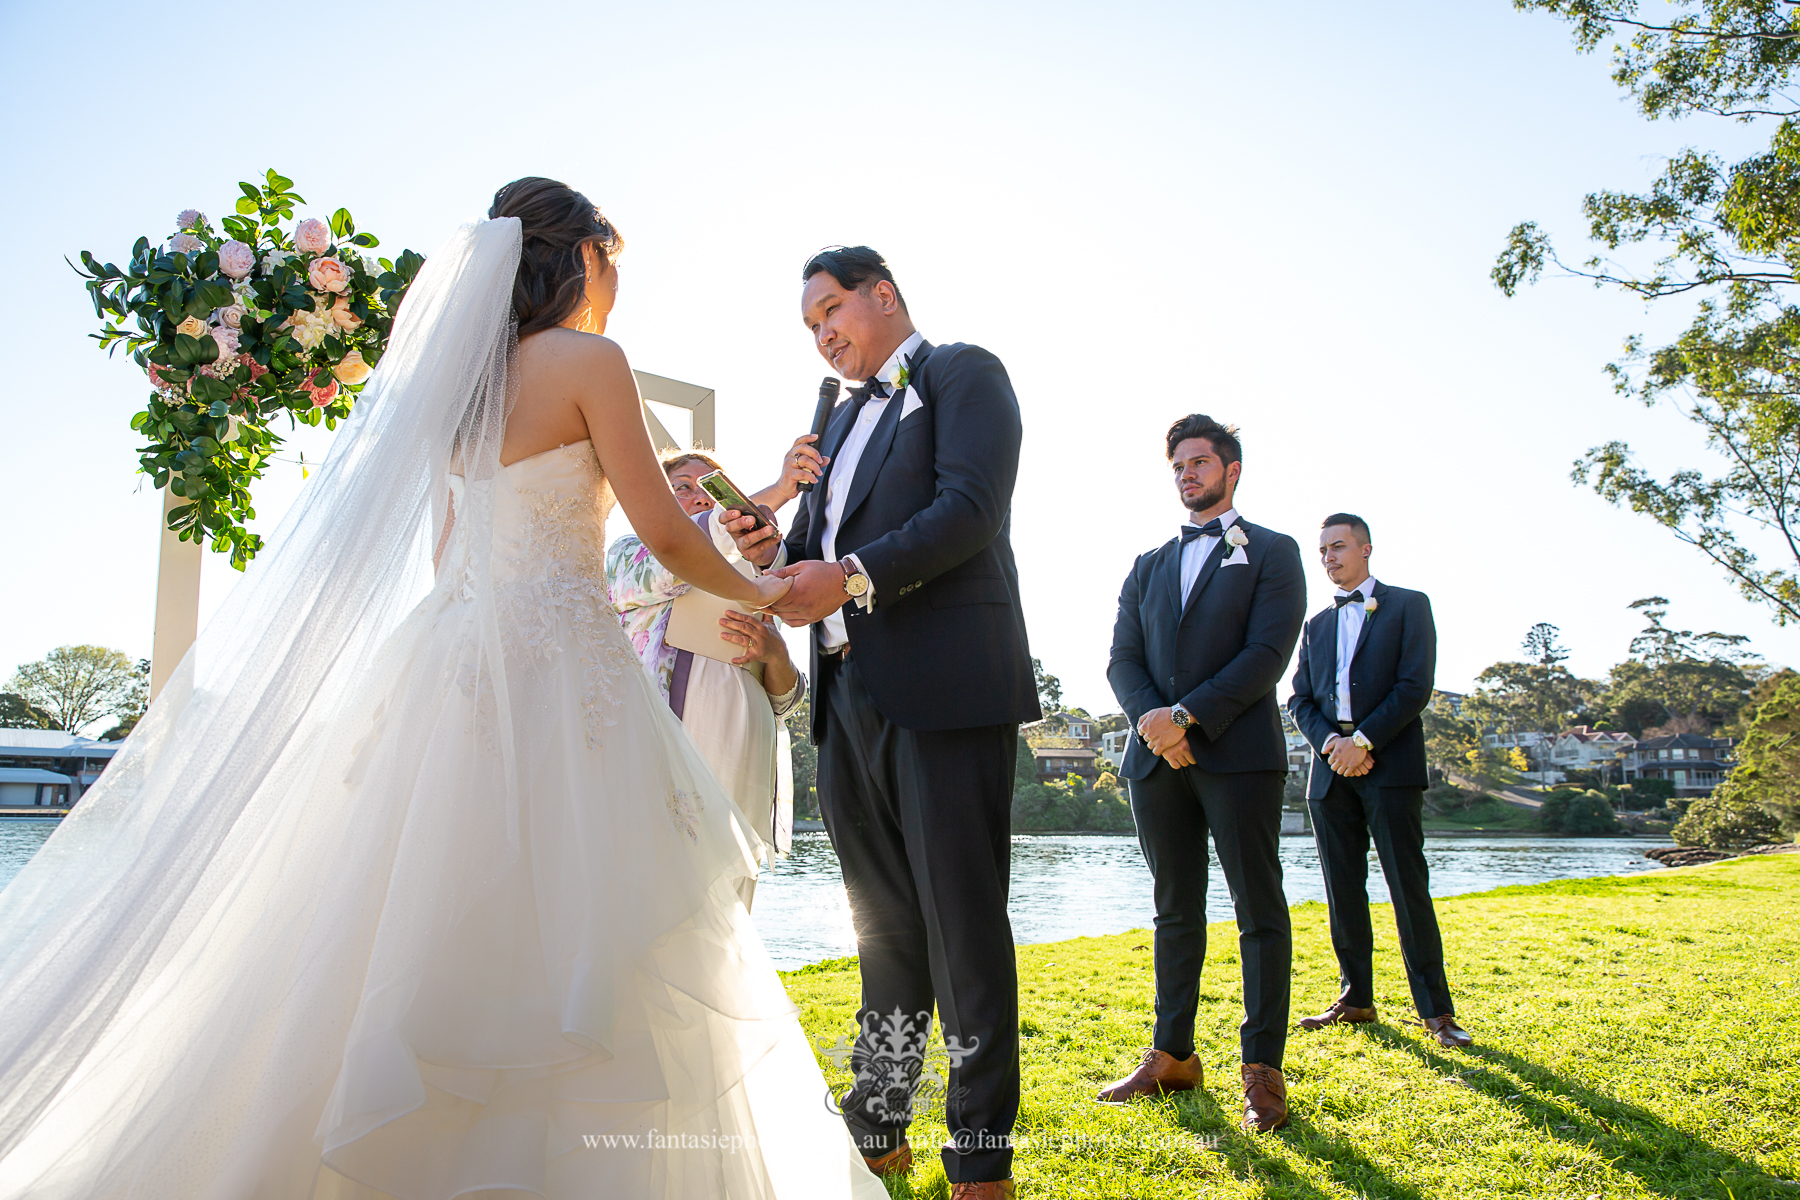 Wedding Photography Banjo Paterson Park and Restaurant | Fantasie Photography